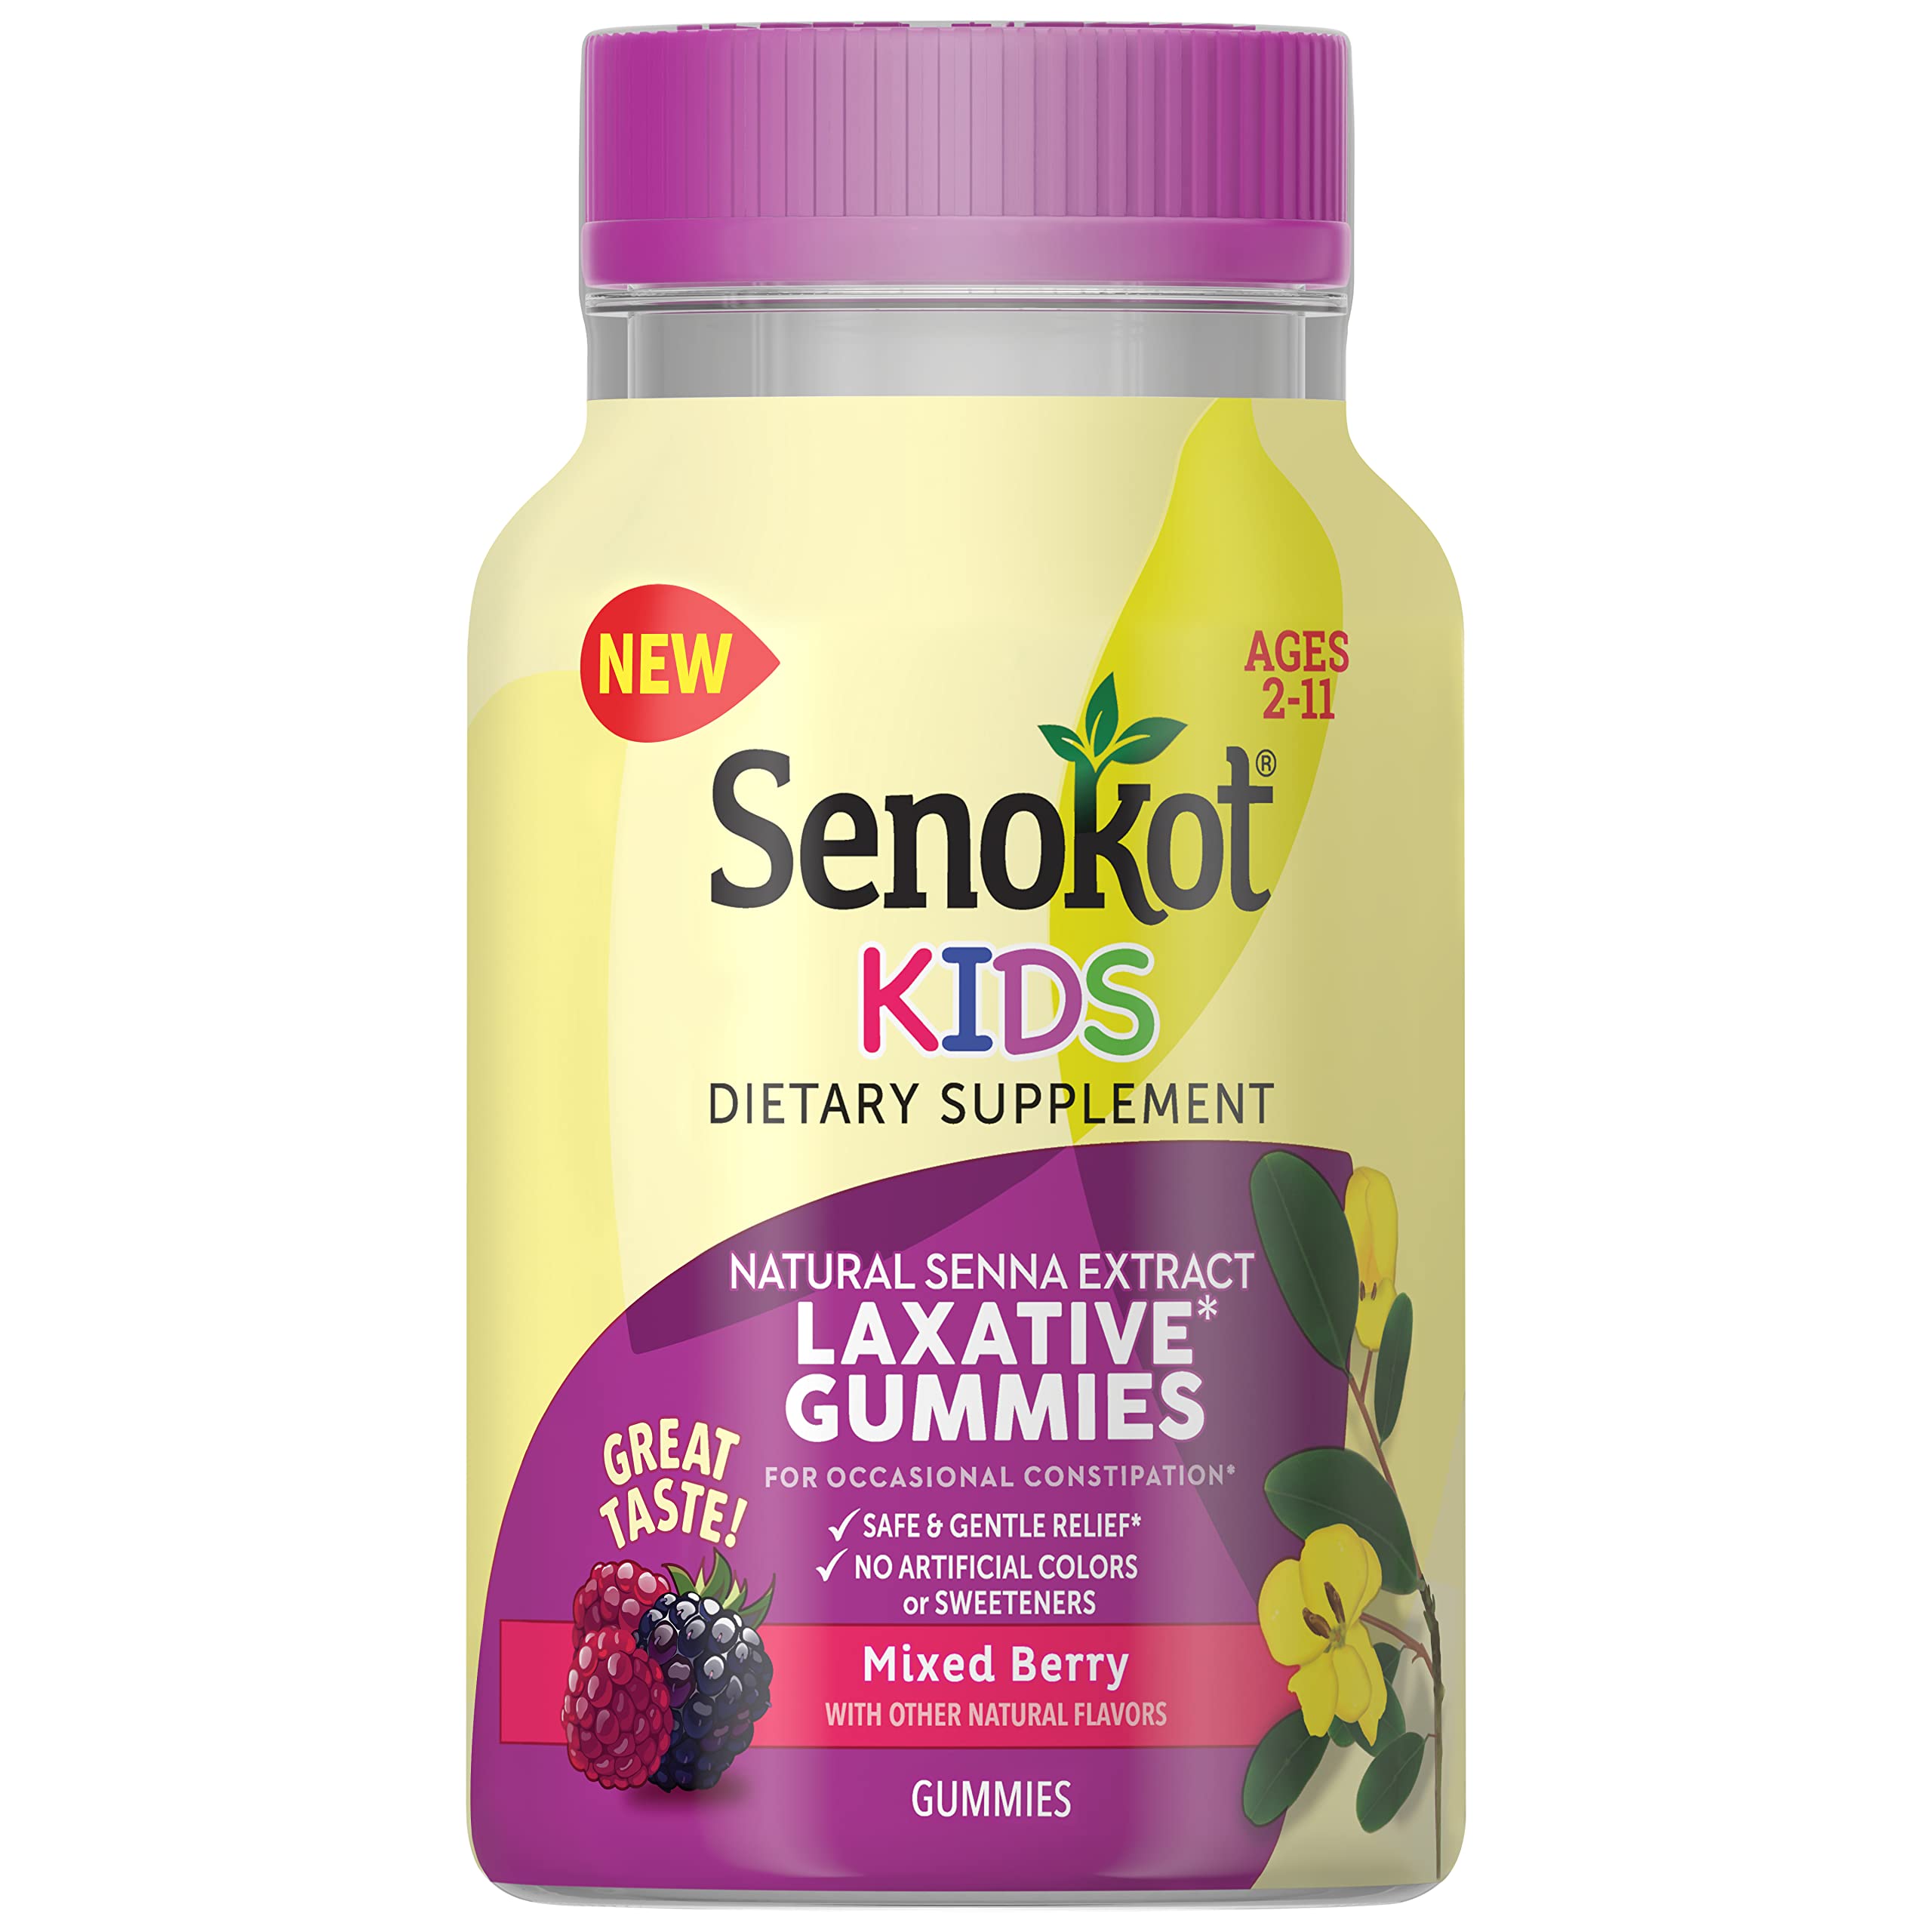 Senokot Kids Mixed Berry Laxative Gummies for Age 2+, Senna Extract for Gentle, Overnight Relief from Occasional Constipation, 40 ct